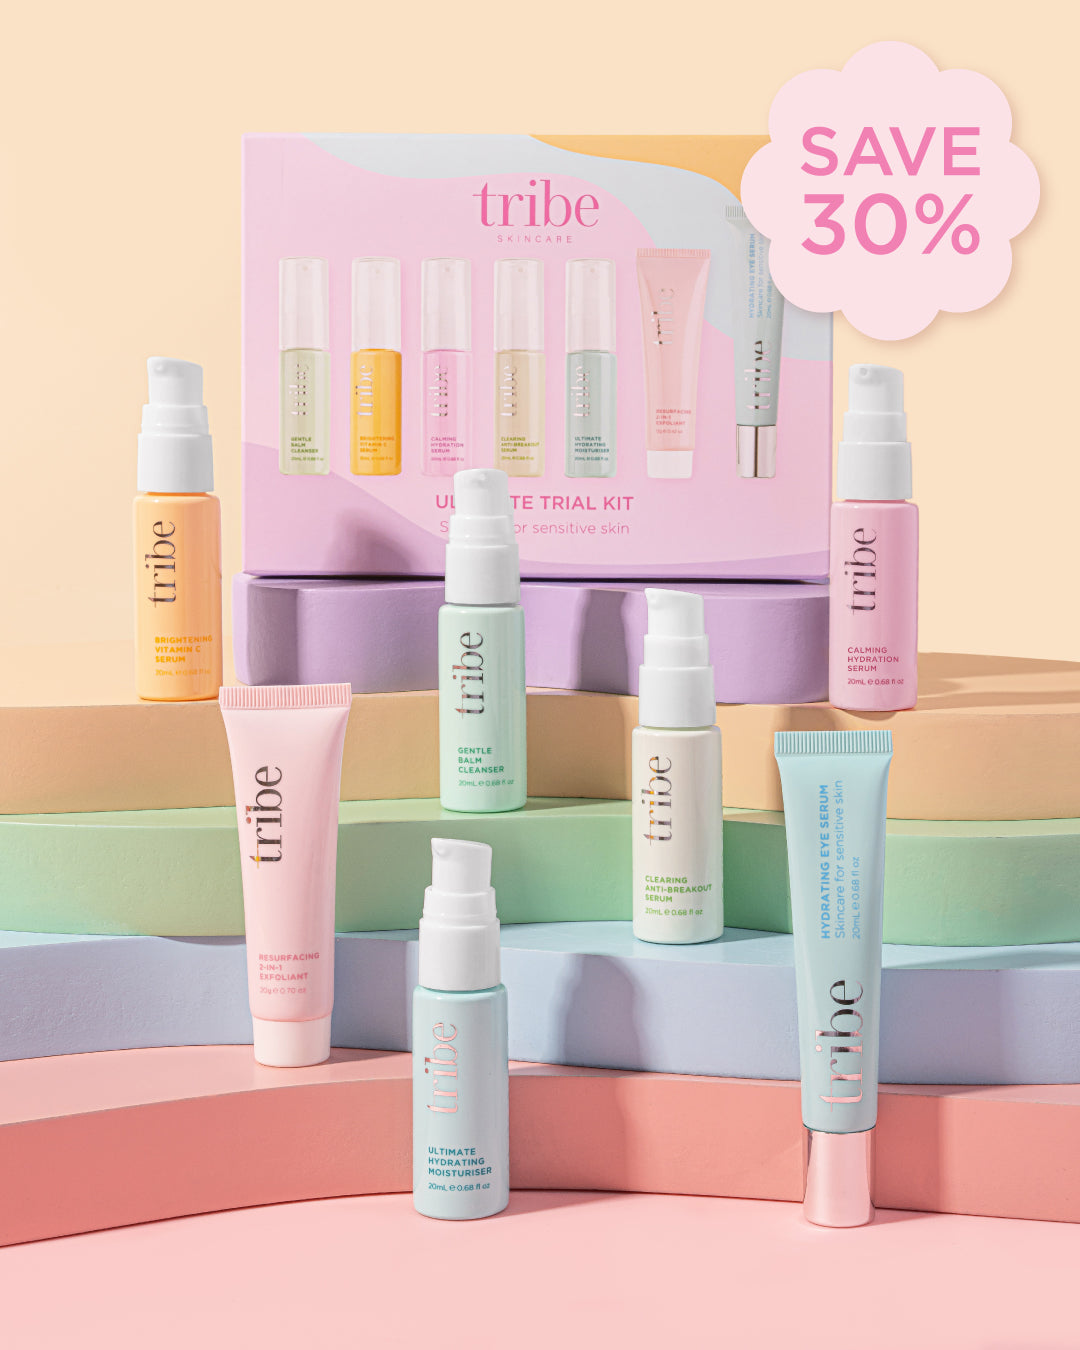 Limited Edition: Tribe Ultimate Trial Kit RRP $99, now $69 (SAVE 30%). Poster featured on Spa Circle Brands' product listing